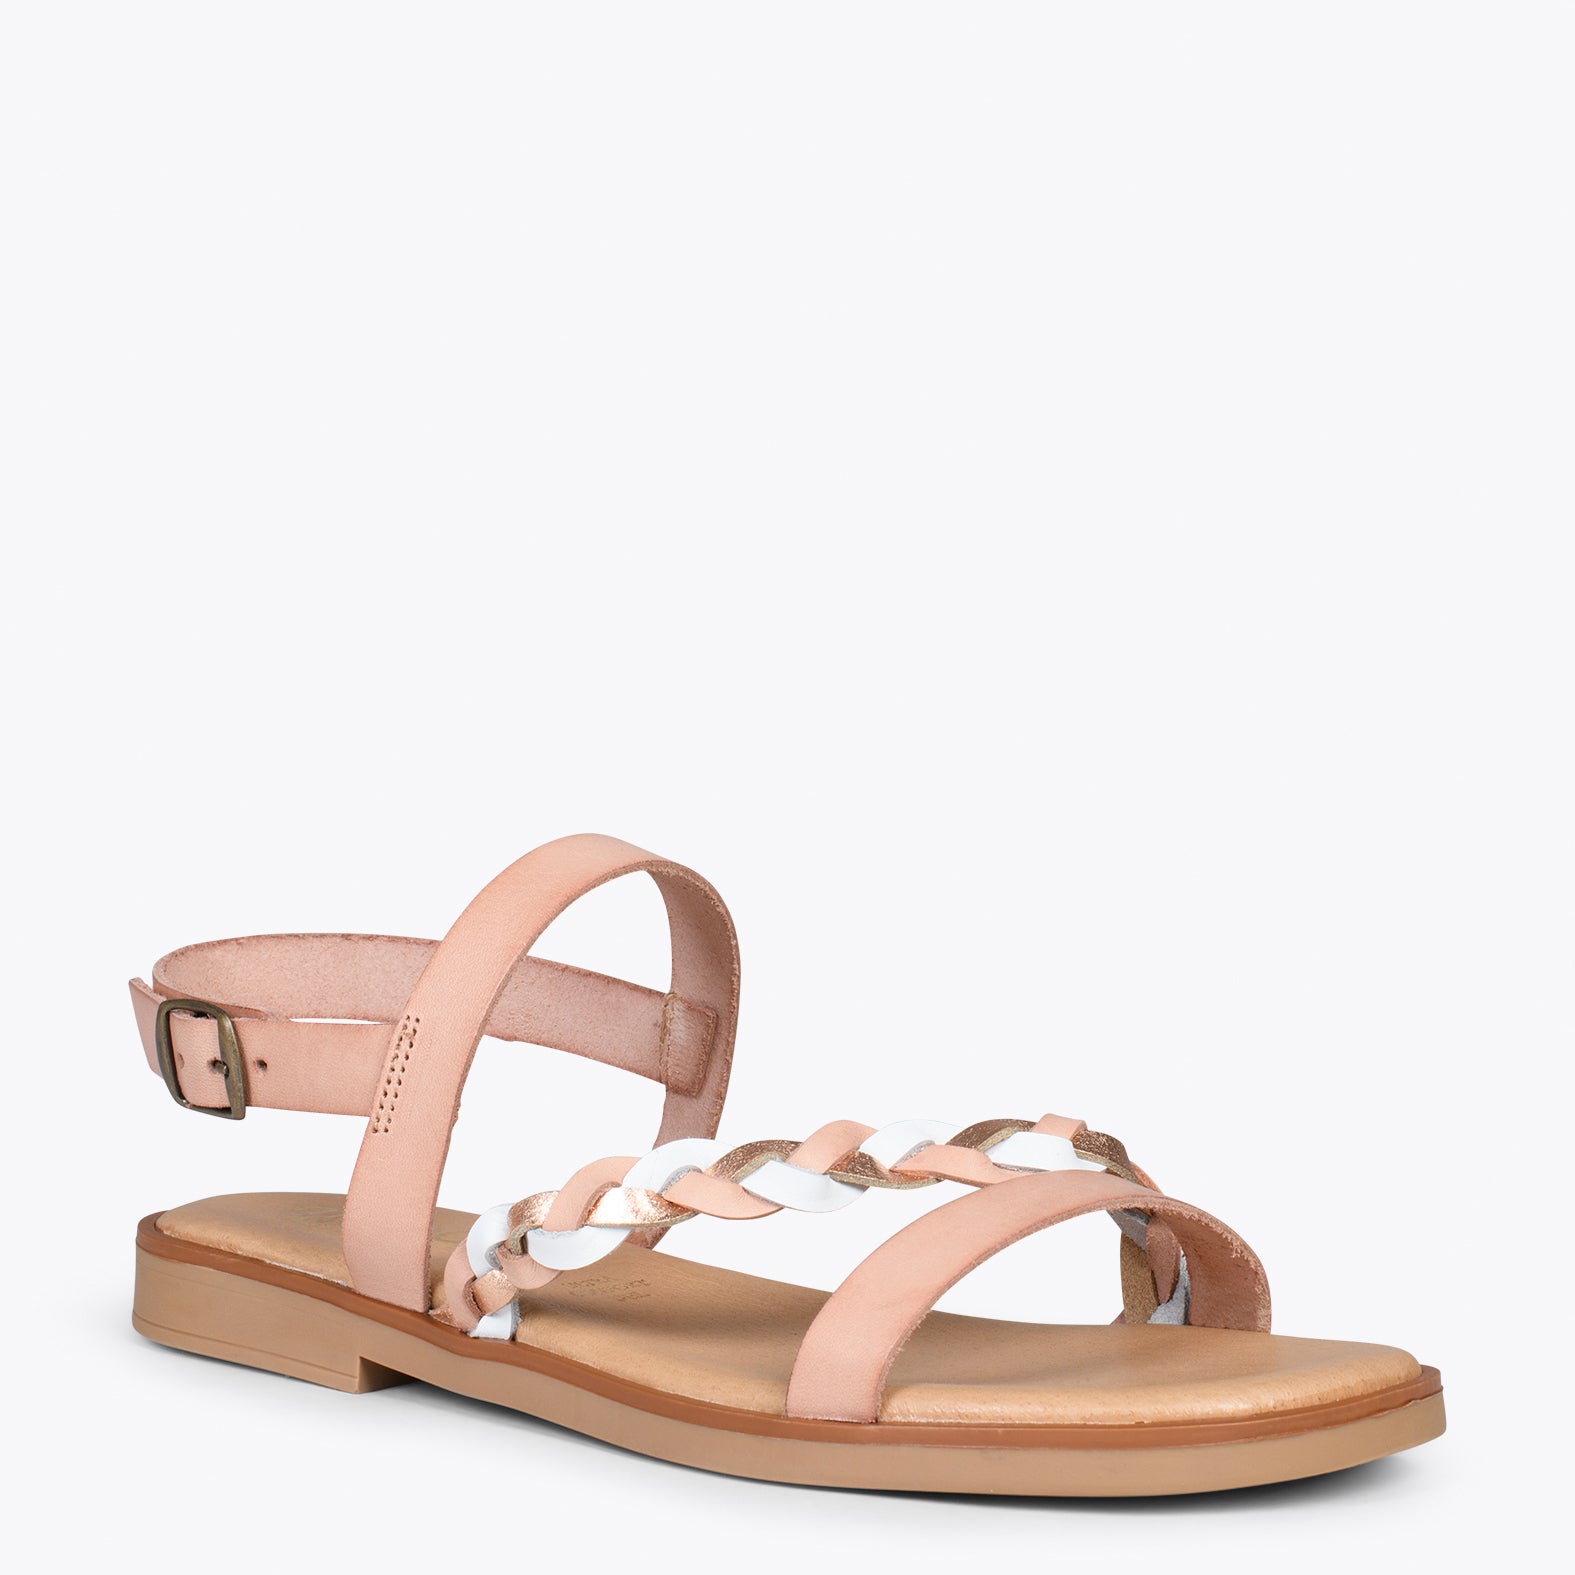 ASTER – NUDE flat sandals with buckle